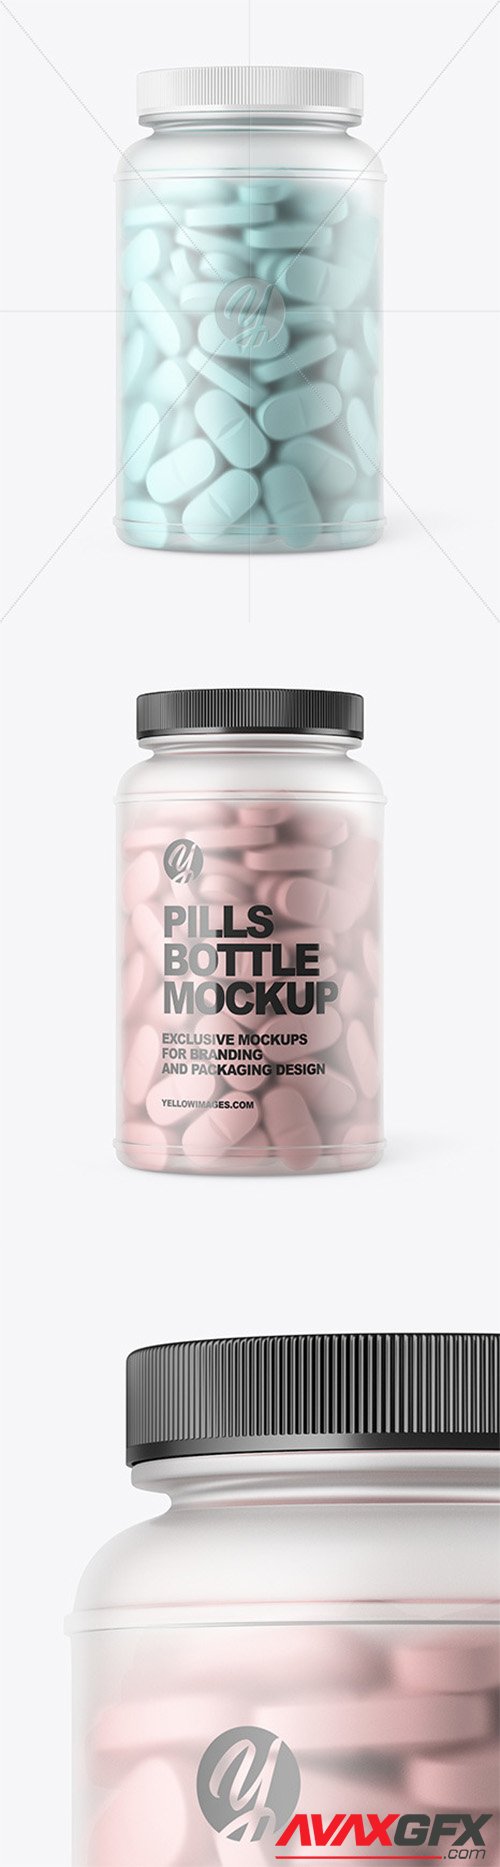 Download Frosted Pills Bottle Mockup 60524 Avaxgfx All Downloads That You Need In One Place Graphic From Nitroflare Rapidgator PSD Mockup Templates